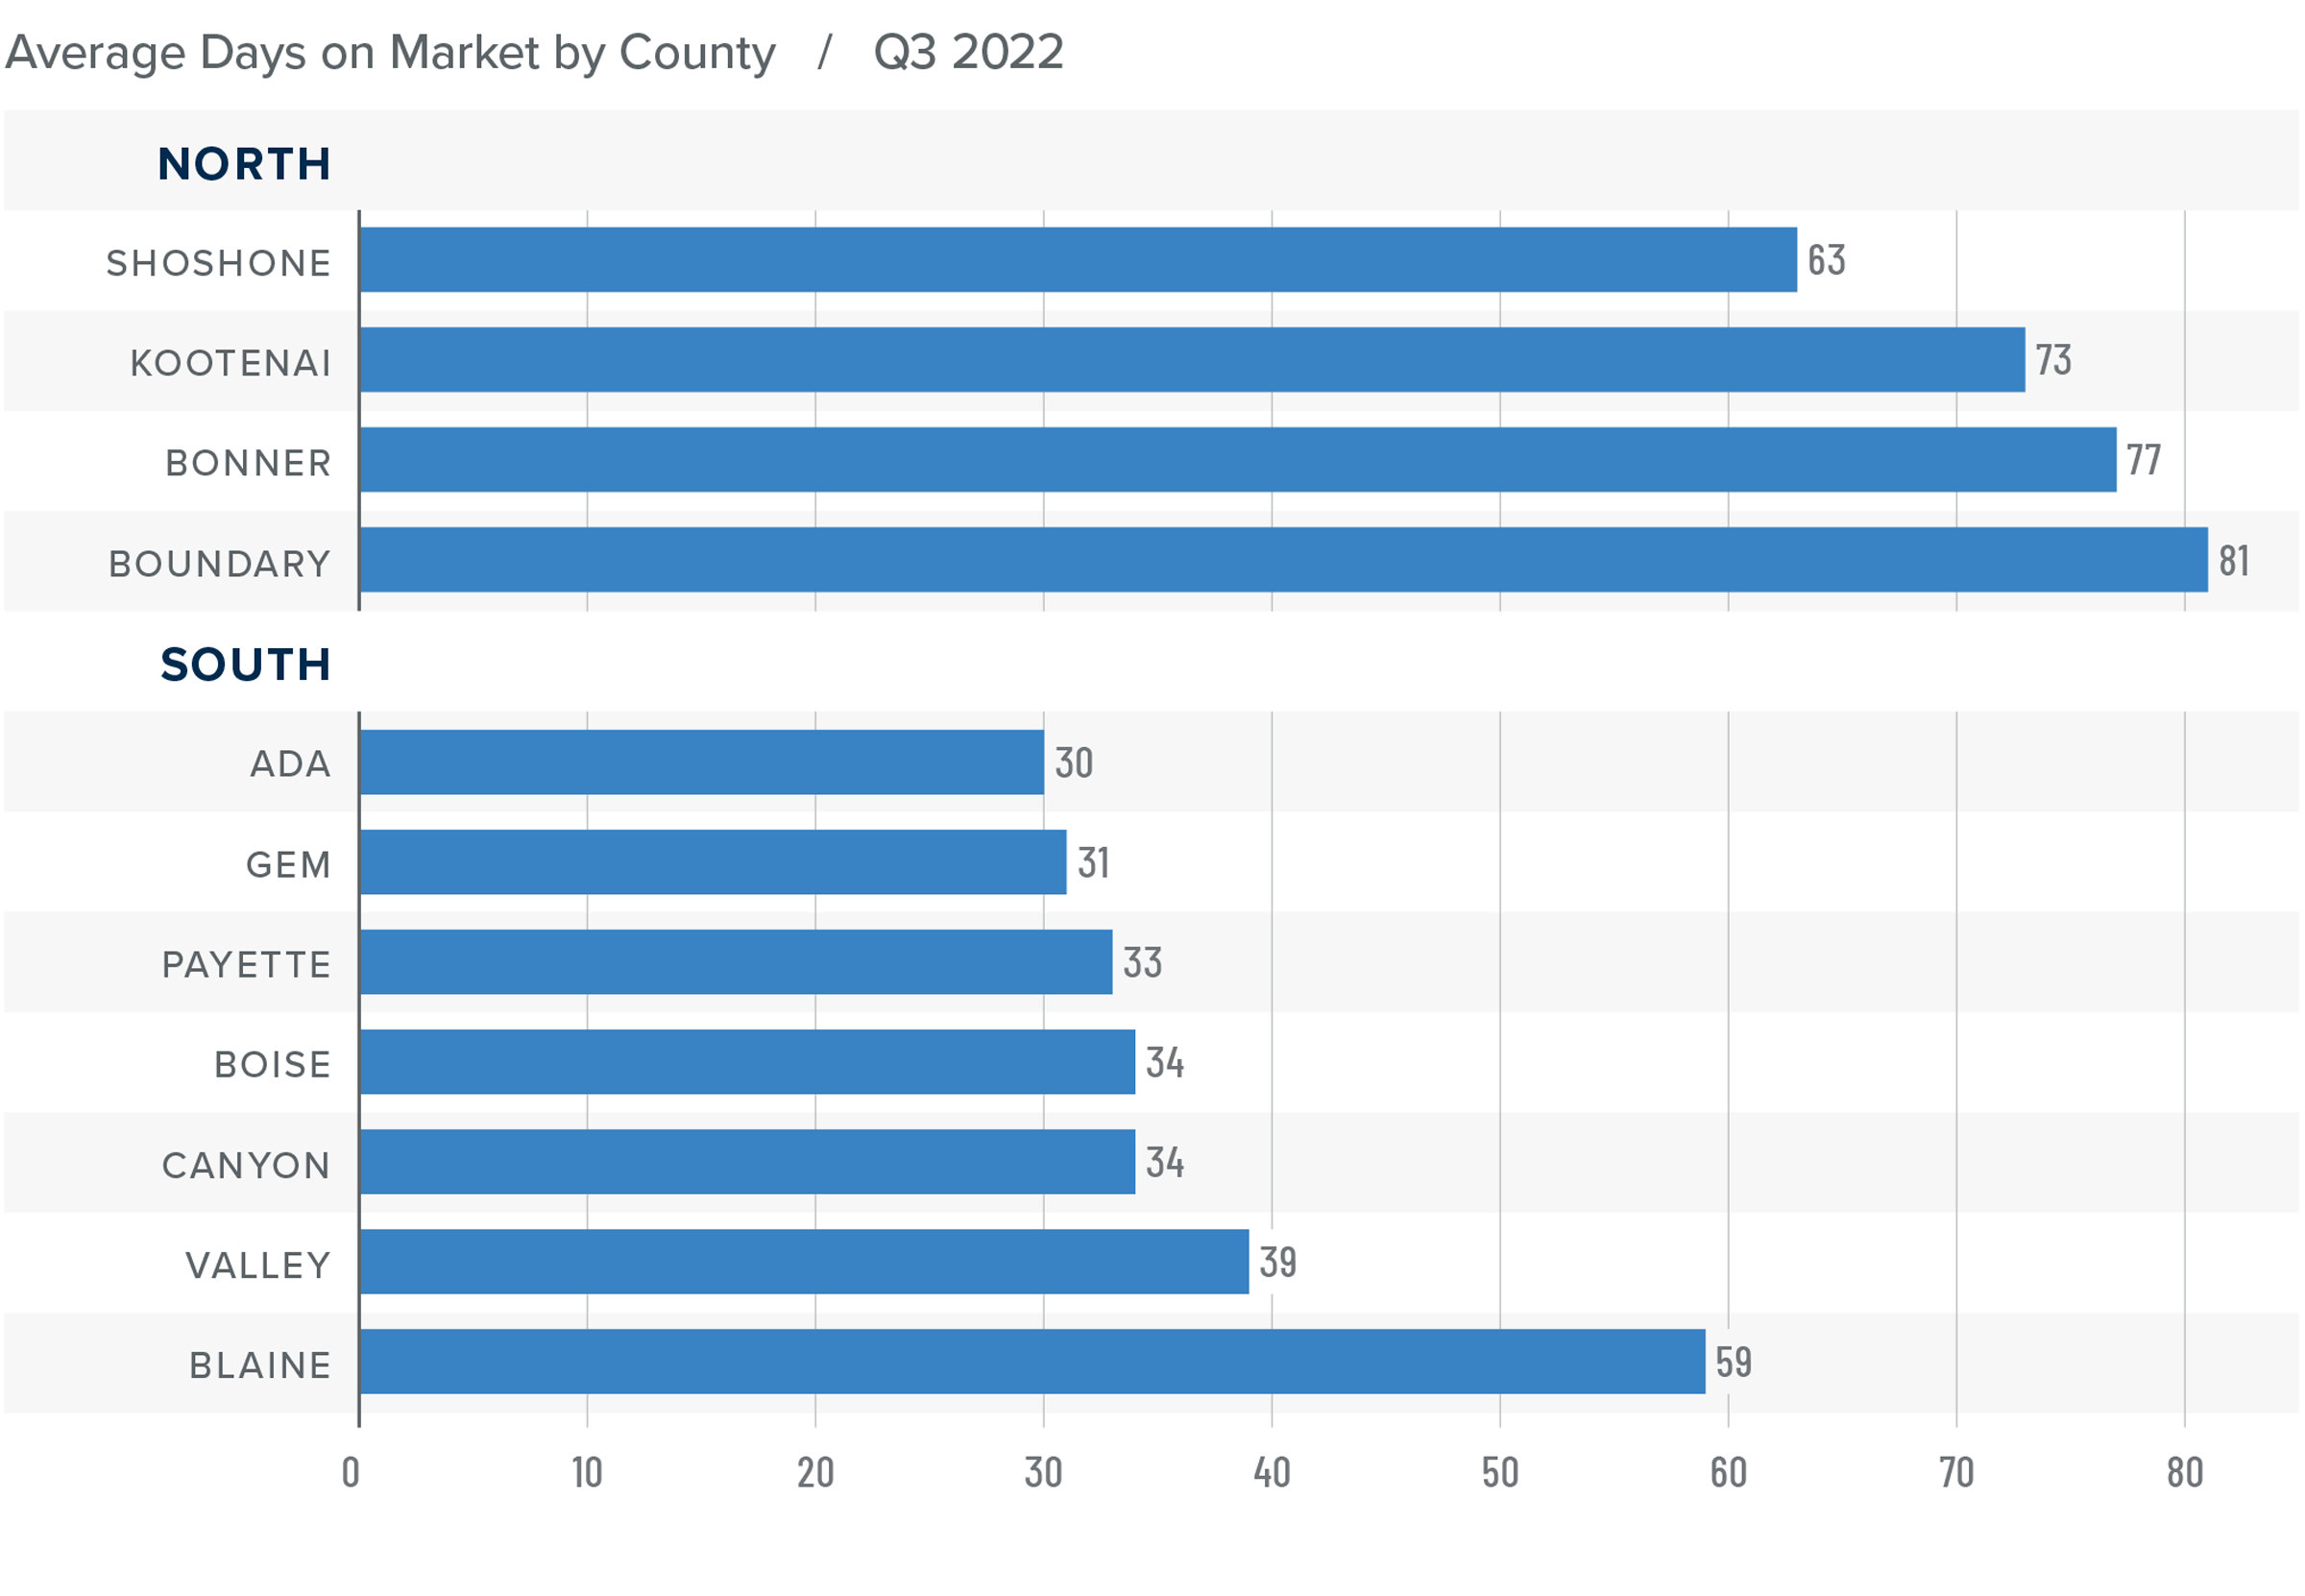 A bar graph showing the average days on market for homes in various counties in North and South Idaho for Q3 2022. In North Idaho, Shoshone County has the lowest DOM at 63, followed by Kootenai at 73, Bonner at 77, and Boundary at 81. In the South, Ada County has the lowest DOM at 30, then Gem at 31, Payette 33, Boise and Canyon 34, Valley 39, and Blaine at 59.